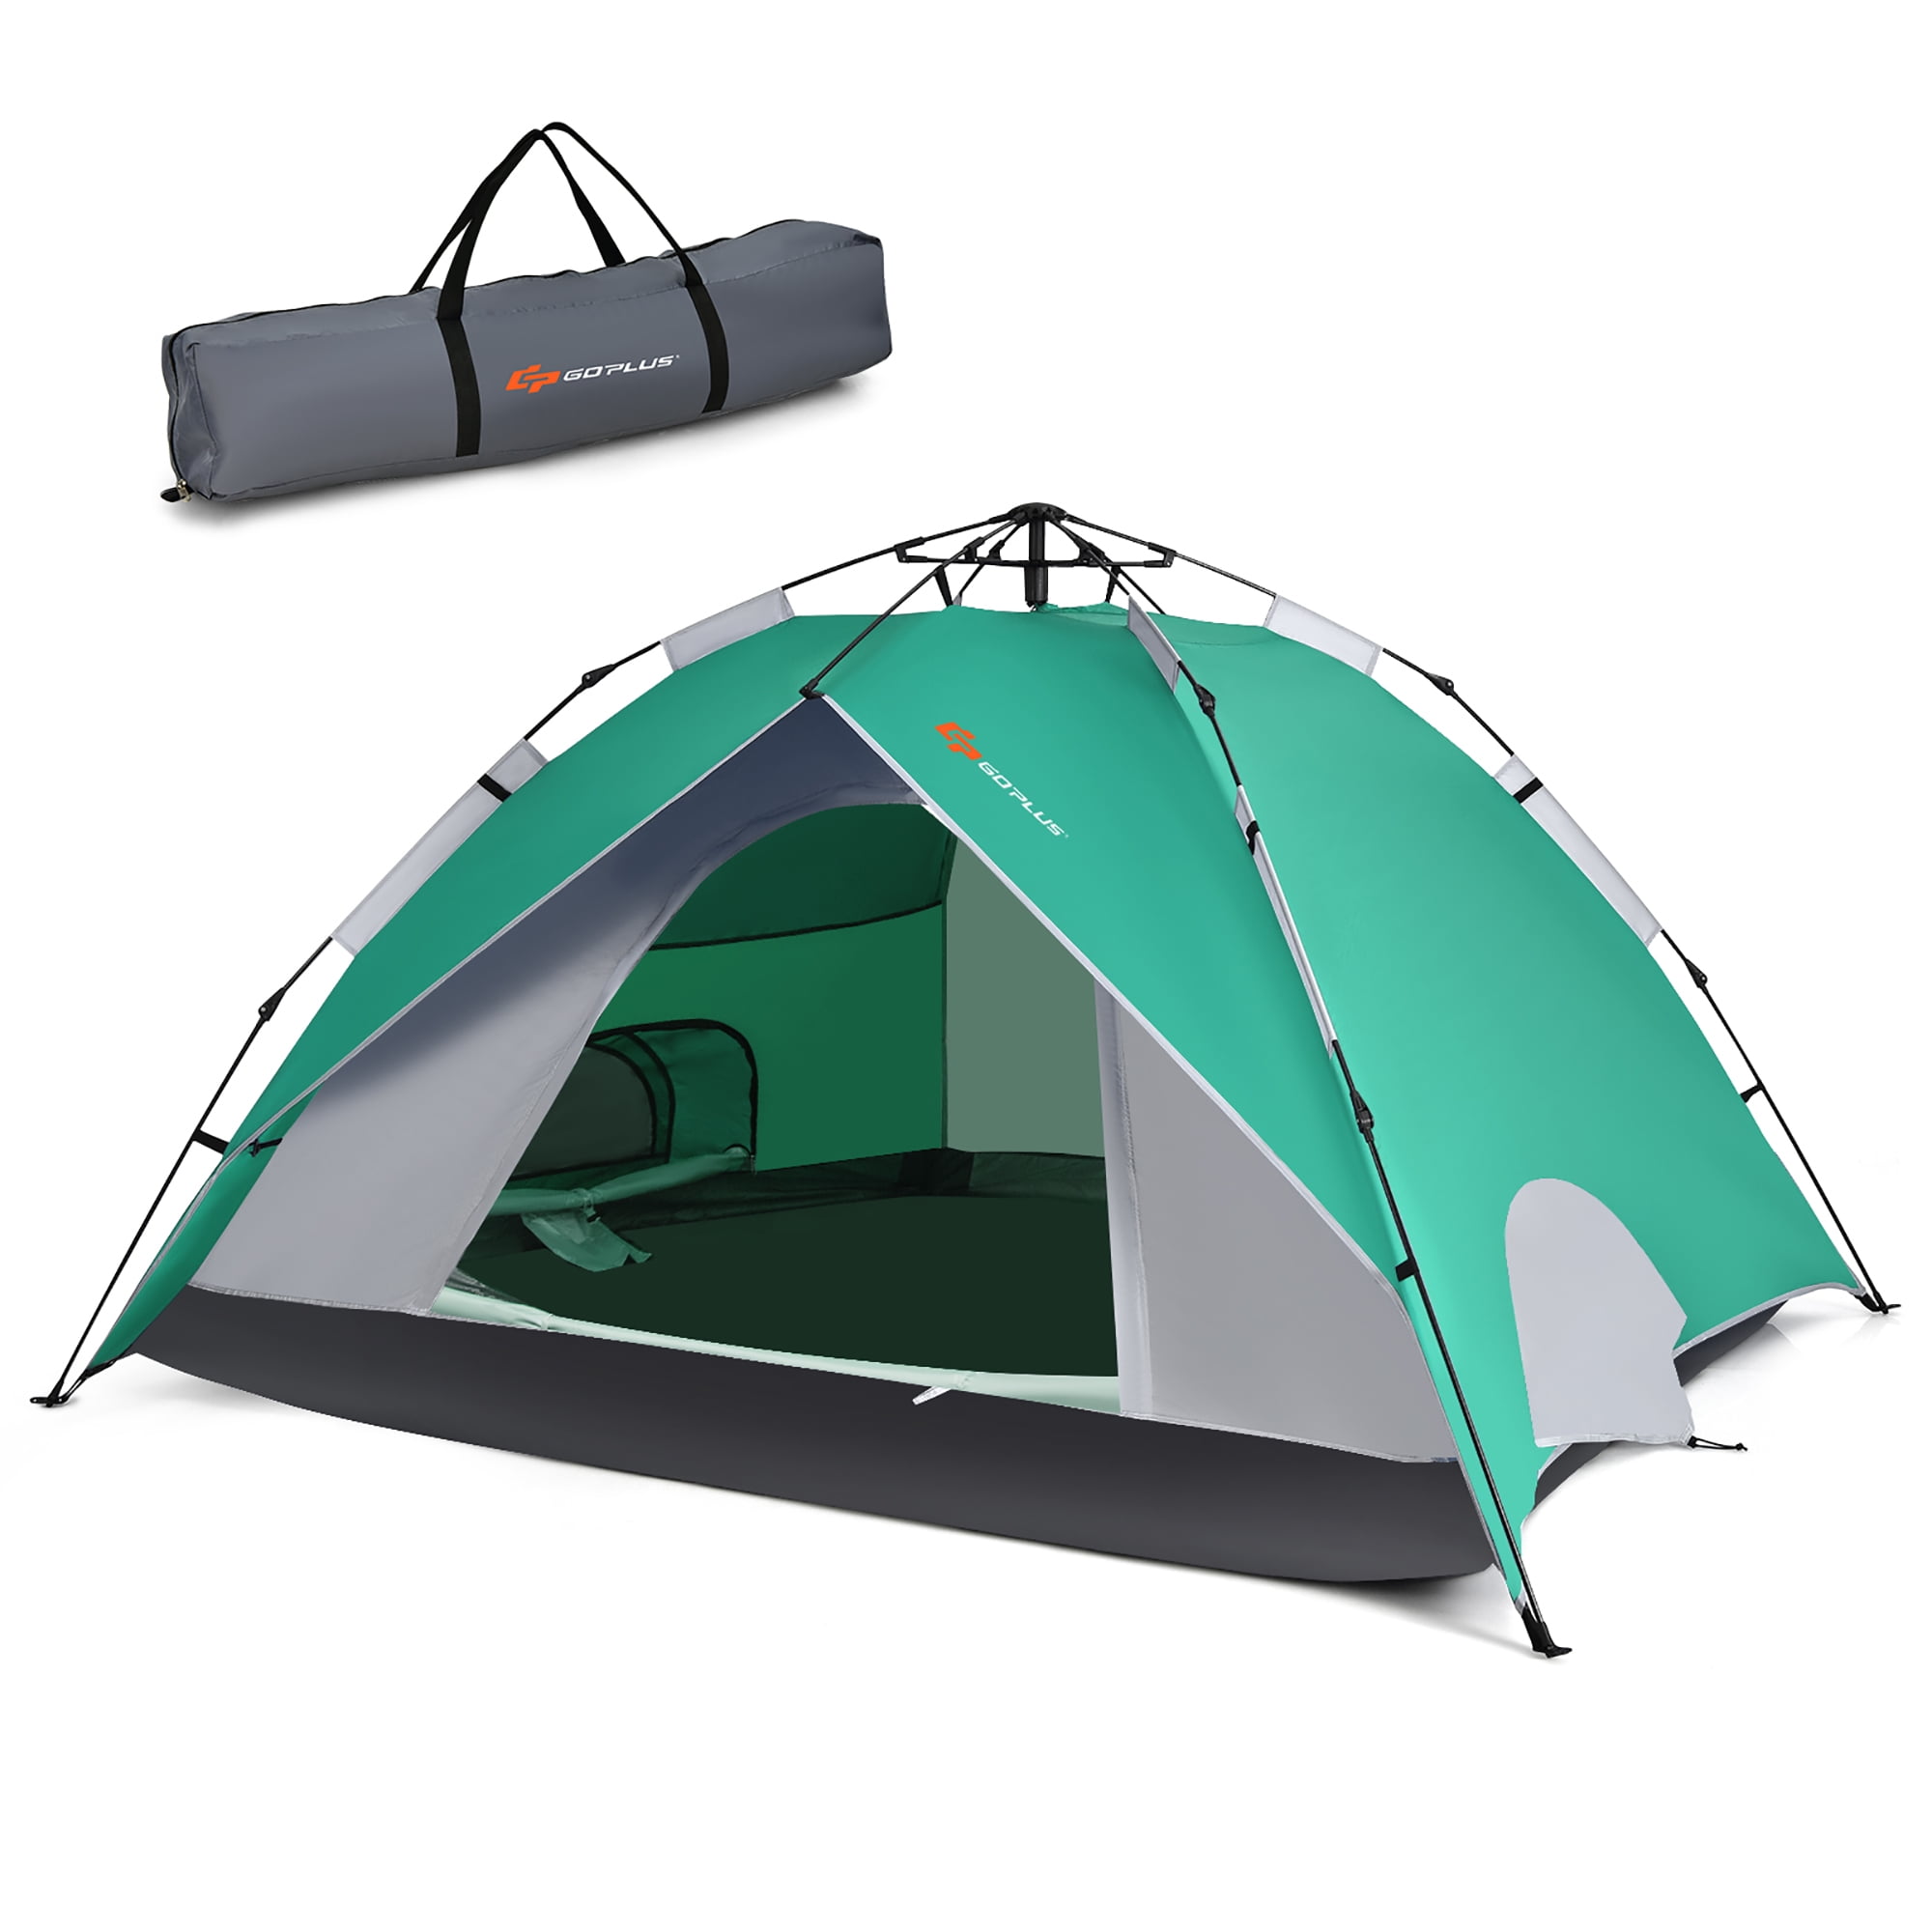 Instant Pop Up Tents For 2/3/4 Person, Family Tent Setup In 60